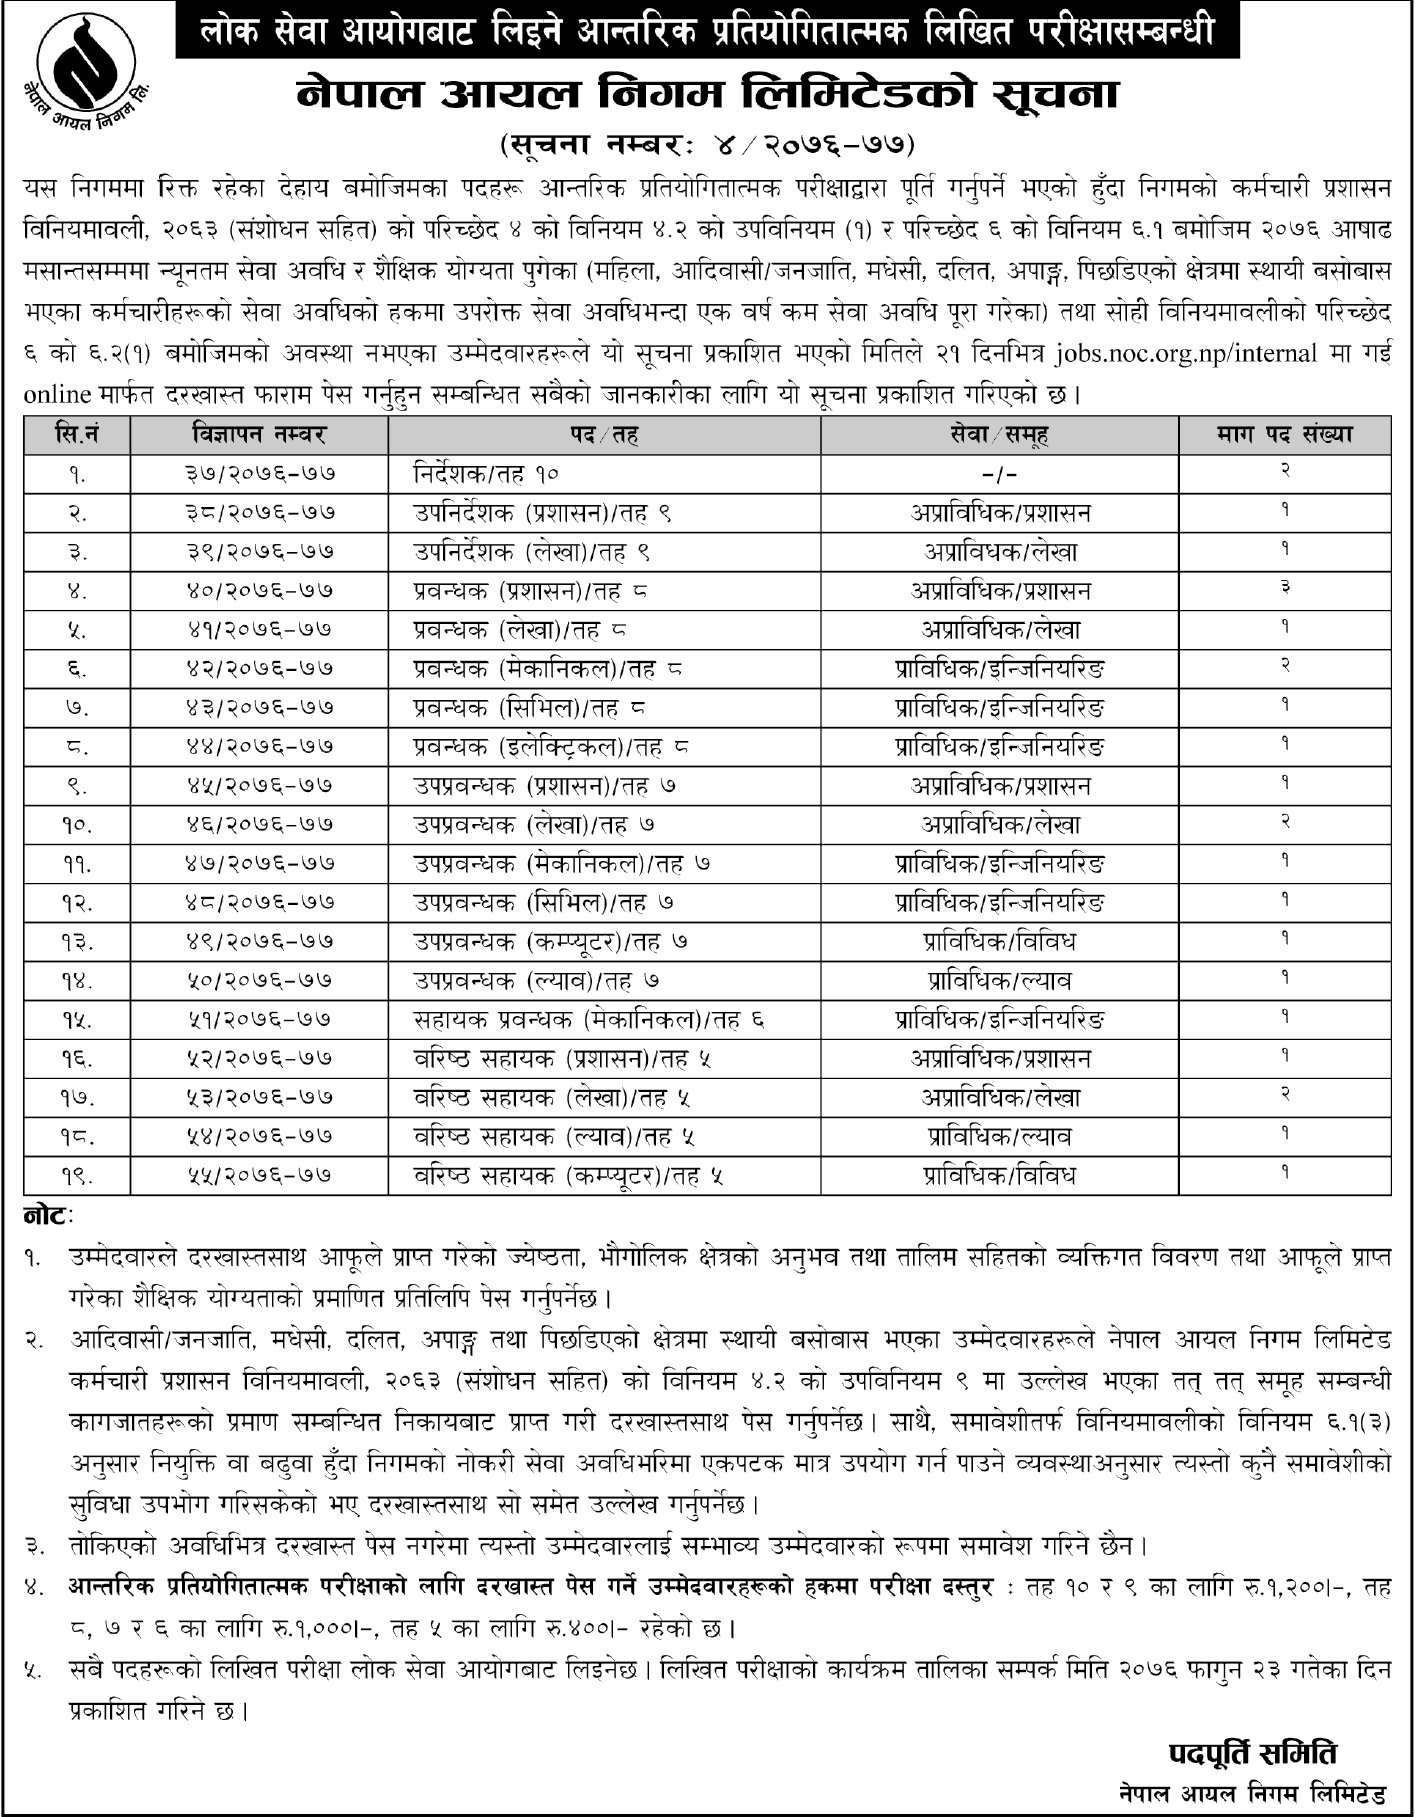 Nepal Oil Corporation Vacancy for Various Positions